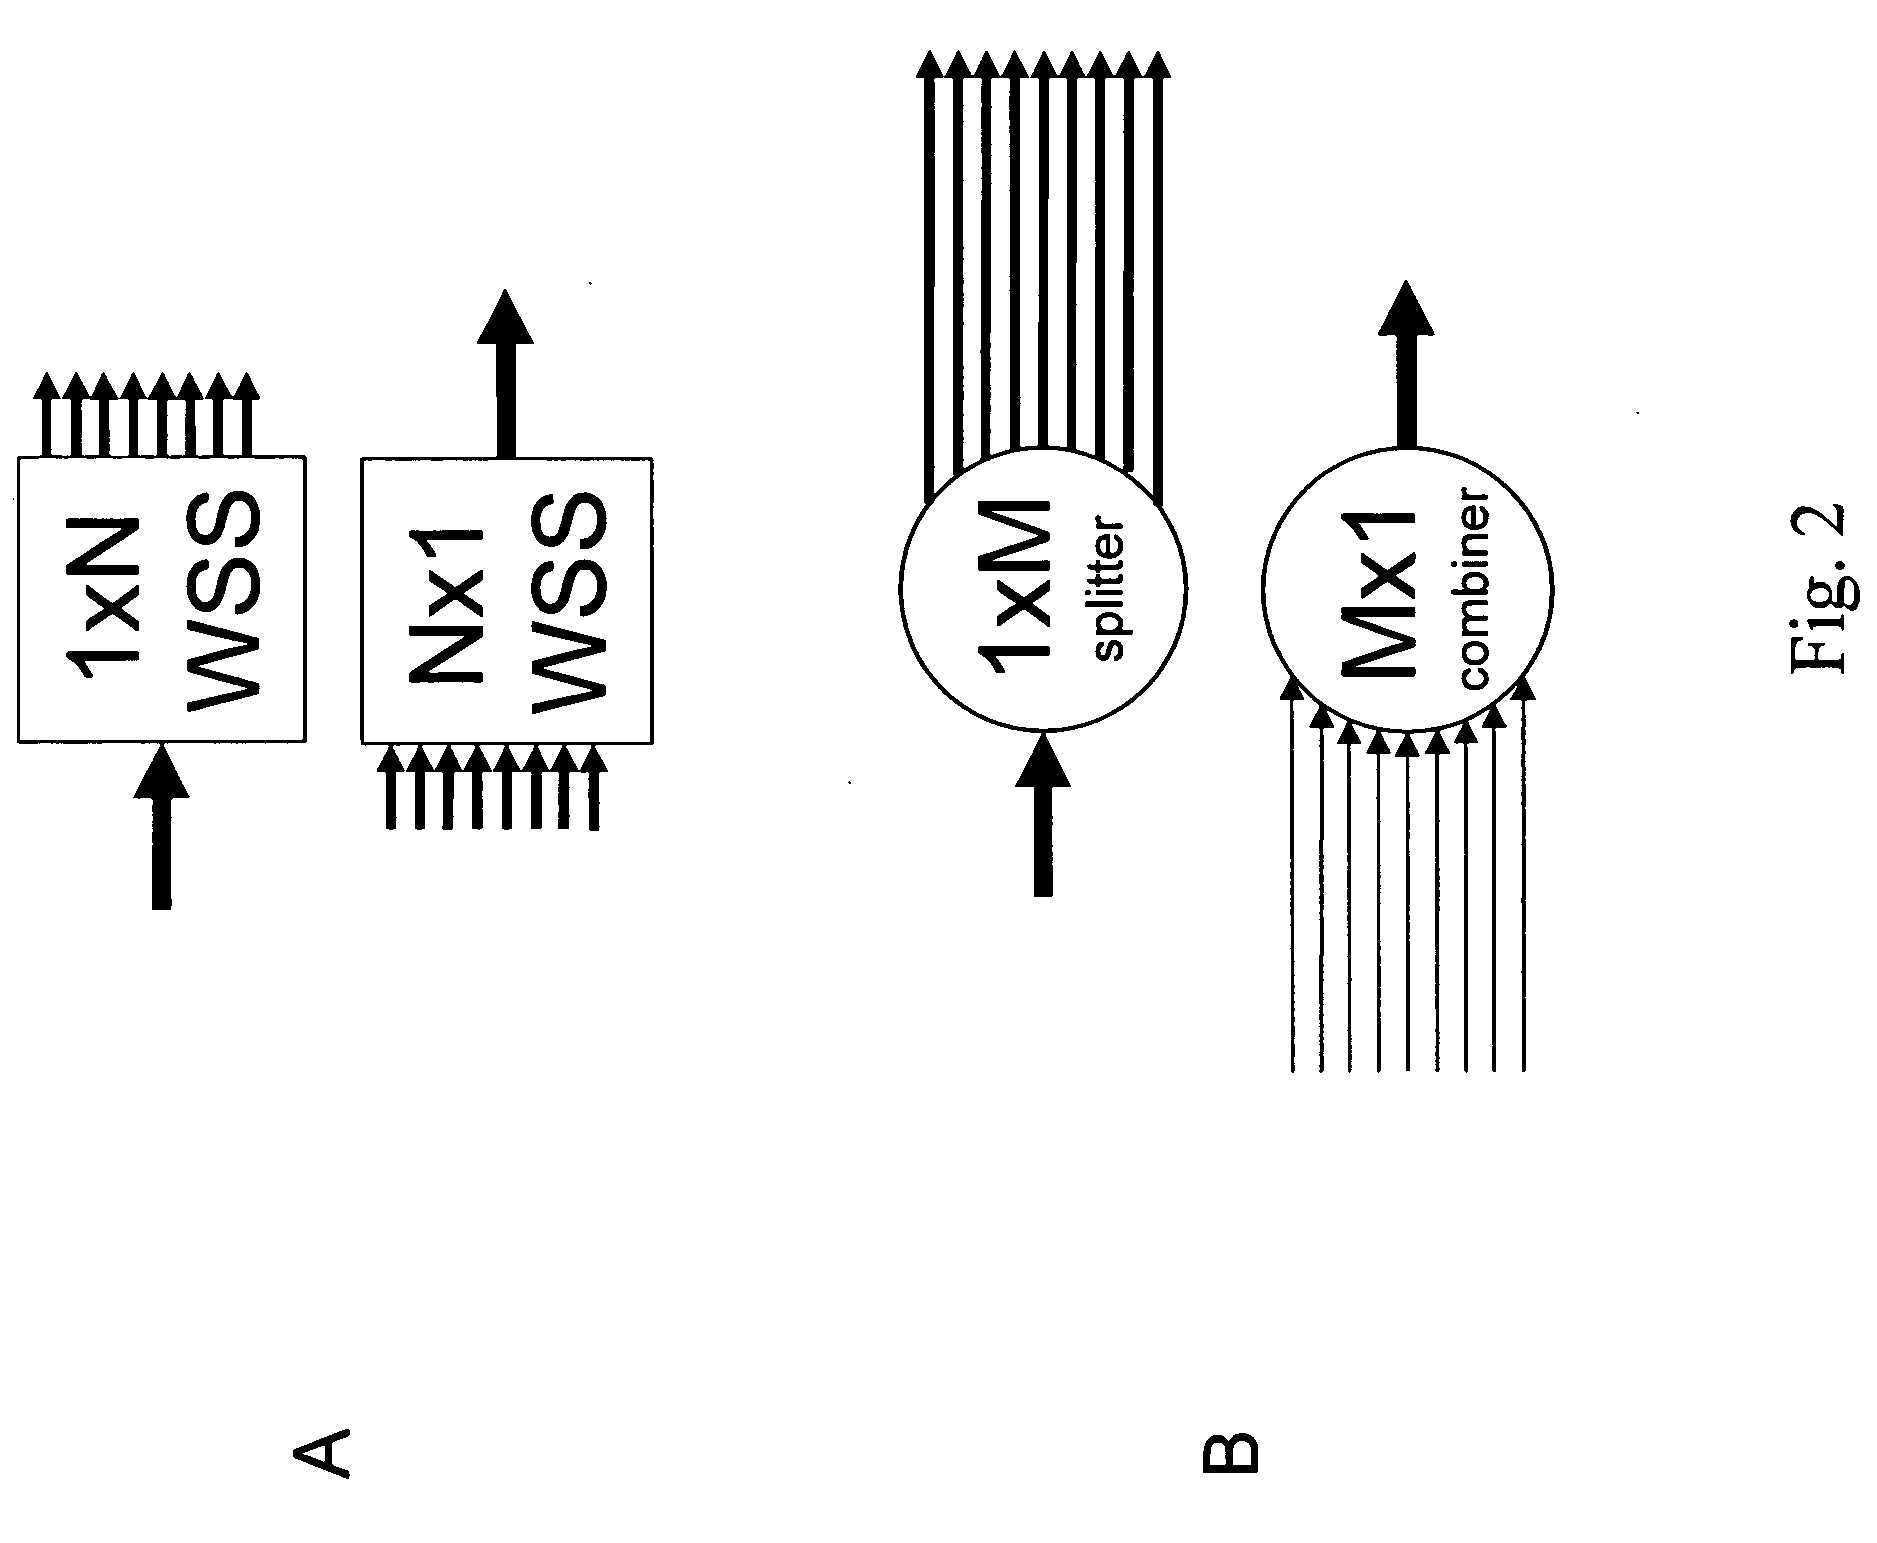 Modular WSS-based communications system with colorless add/drop interfaces